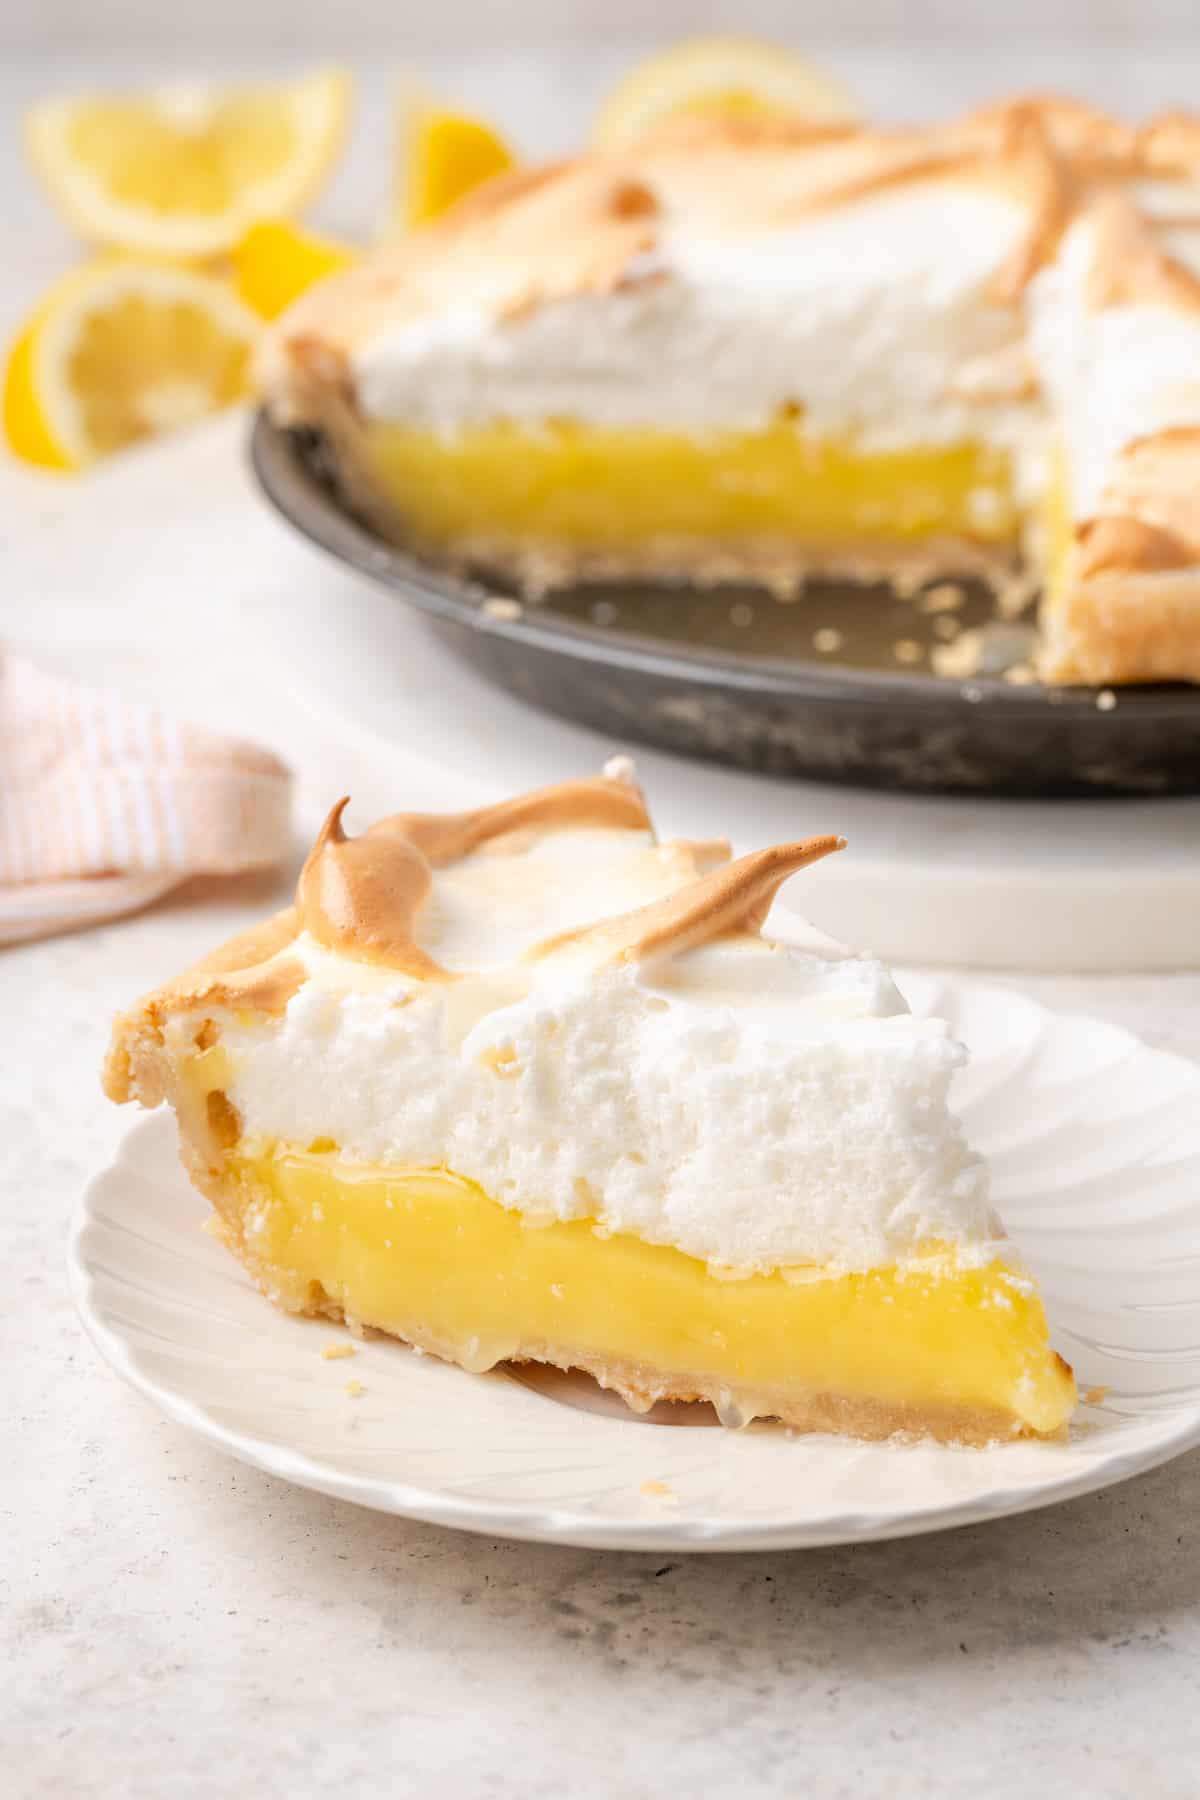 A slice of gluten free lemon meringue pie on a white plate with the pie in the background.